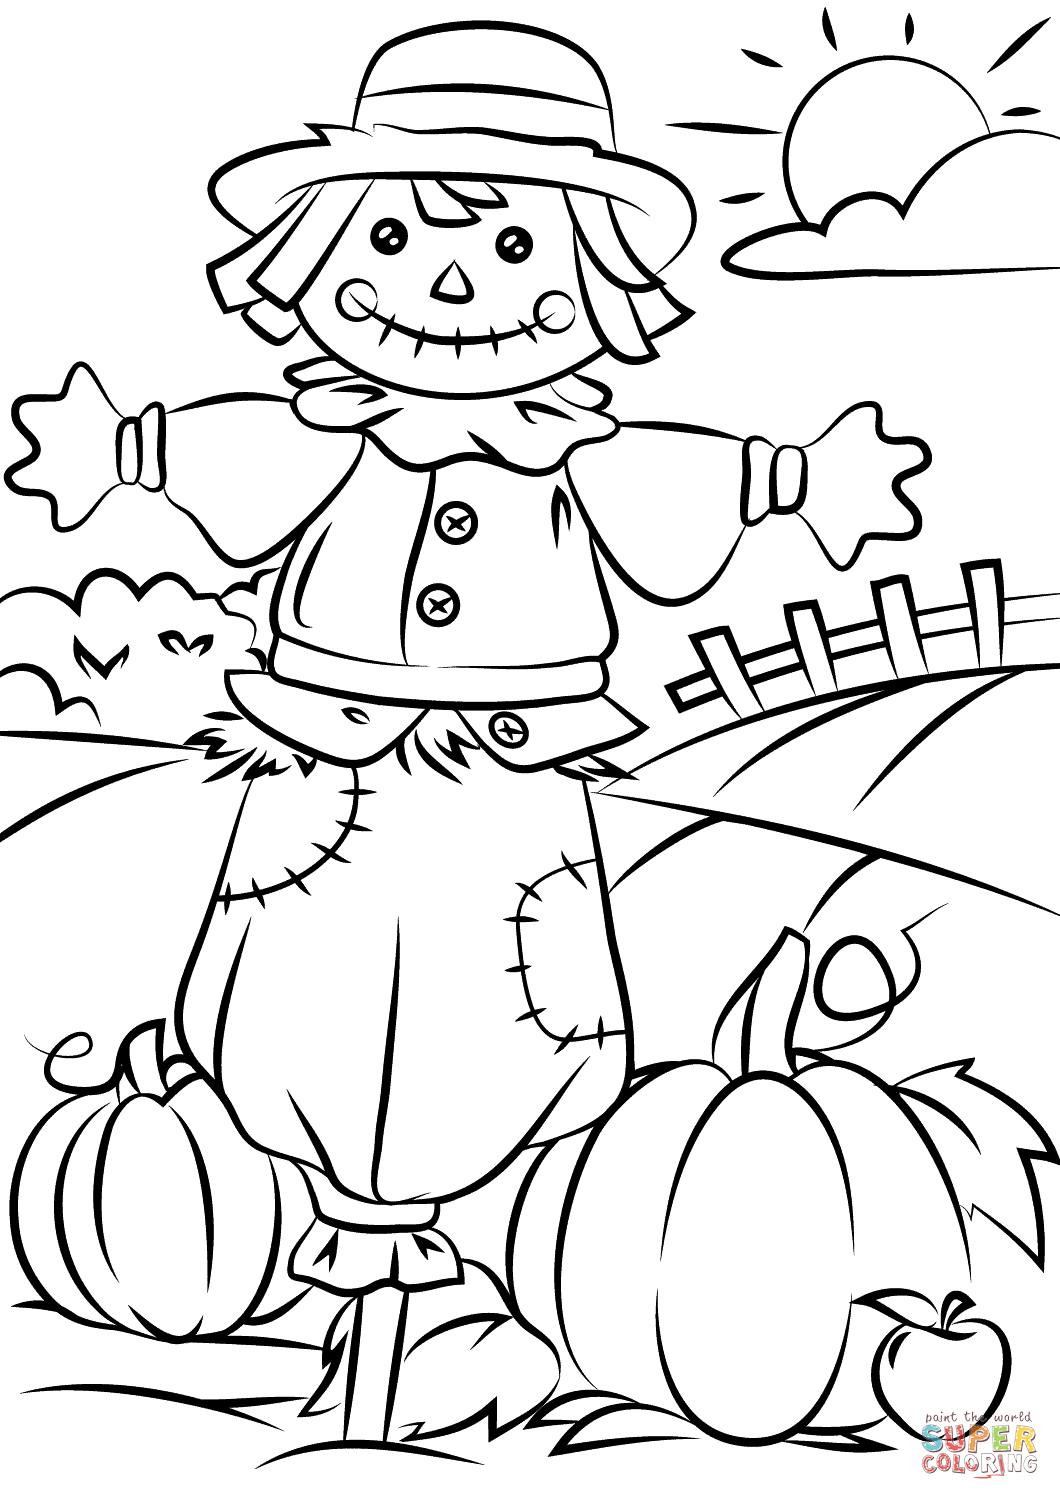 Autumn Scene With Scarecrow Coloring Page | Free Printable Coloring - Free Printable Leaf Coloring Pages